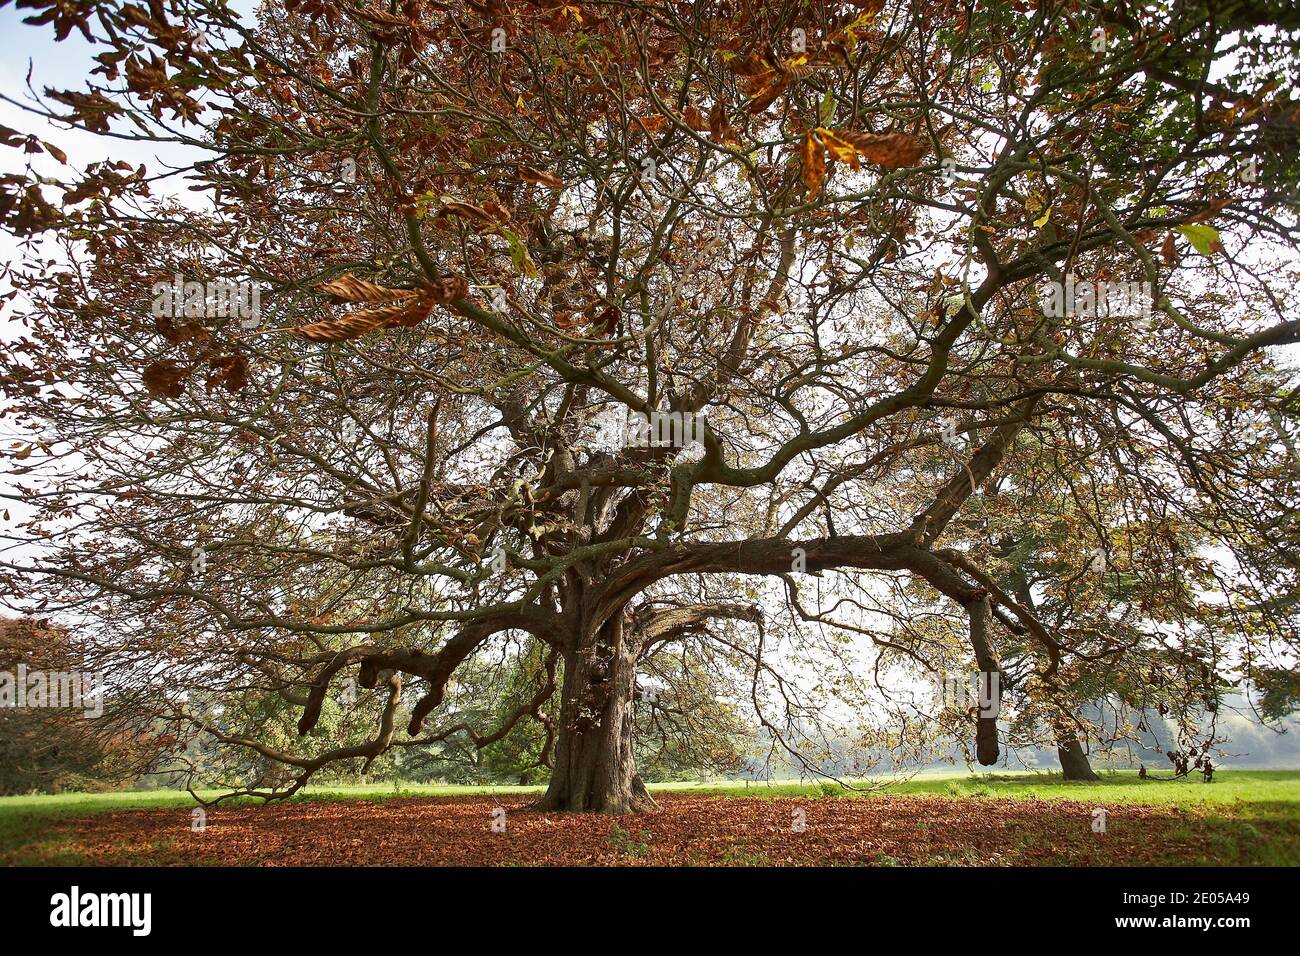 GREAT BRITAIN / England /A large Chestnut tree with colorful leaves in autumn in Blenheim Palace viewed from the beautiful Park Stock Photo